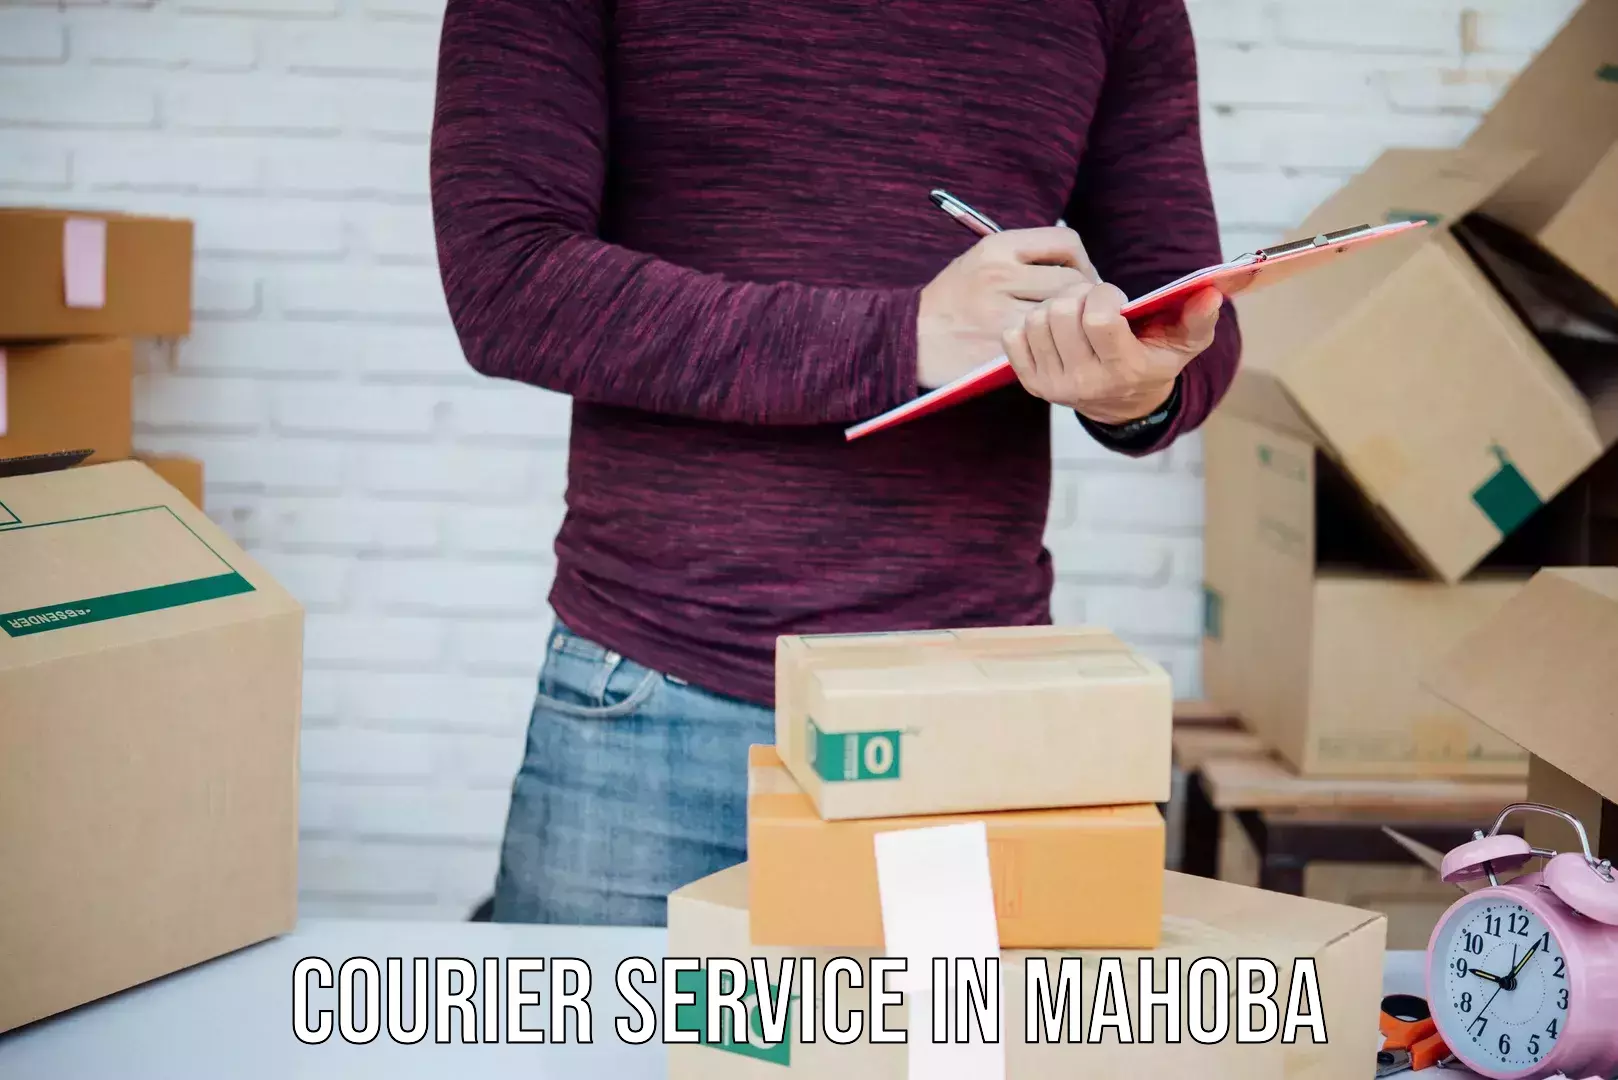 Expedited parcel delivery in Mahoba